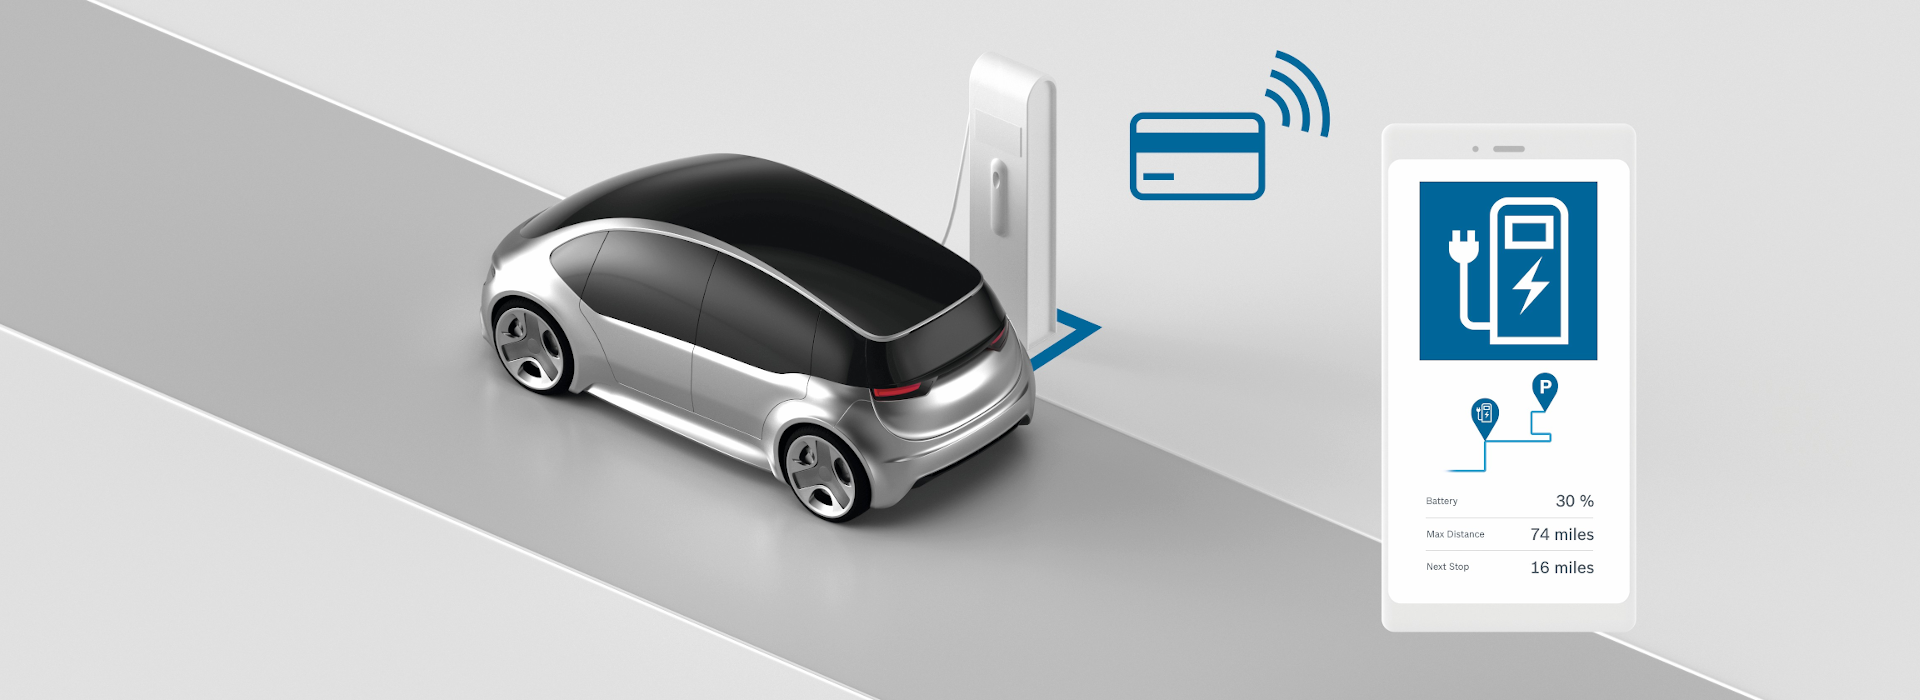 Bosch charge point access & payment stage image